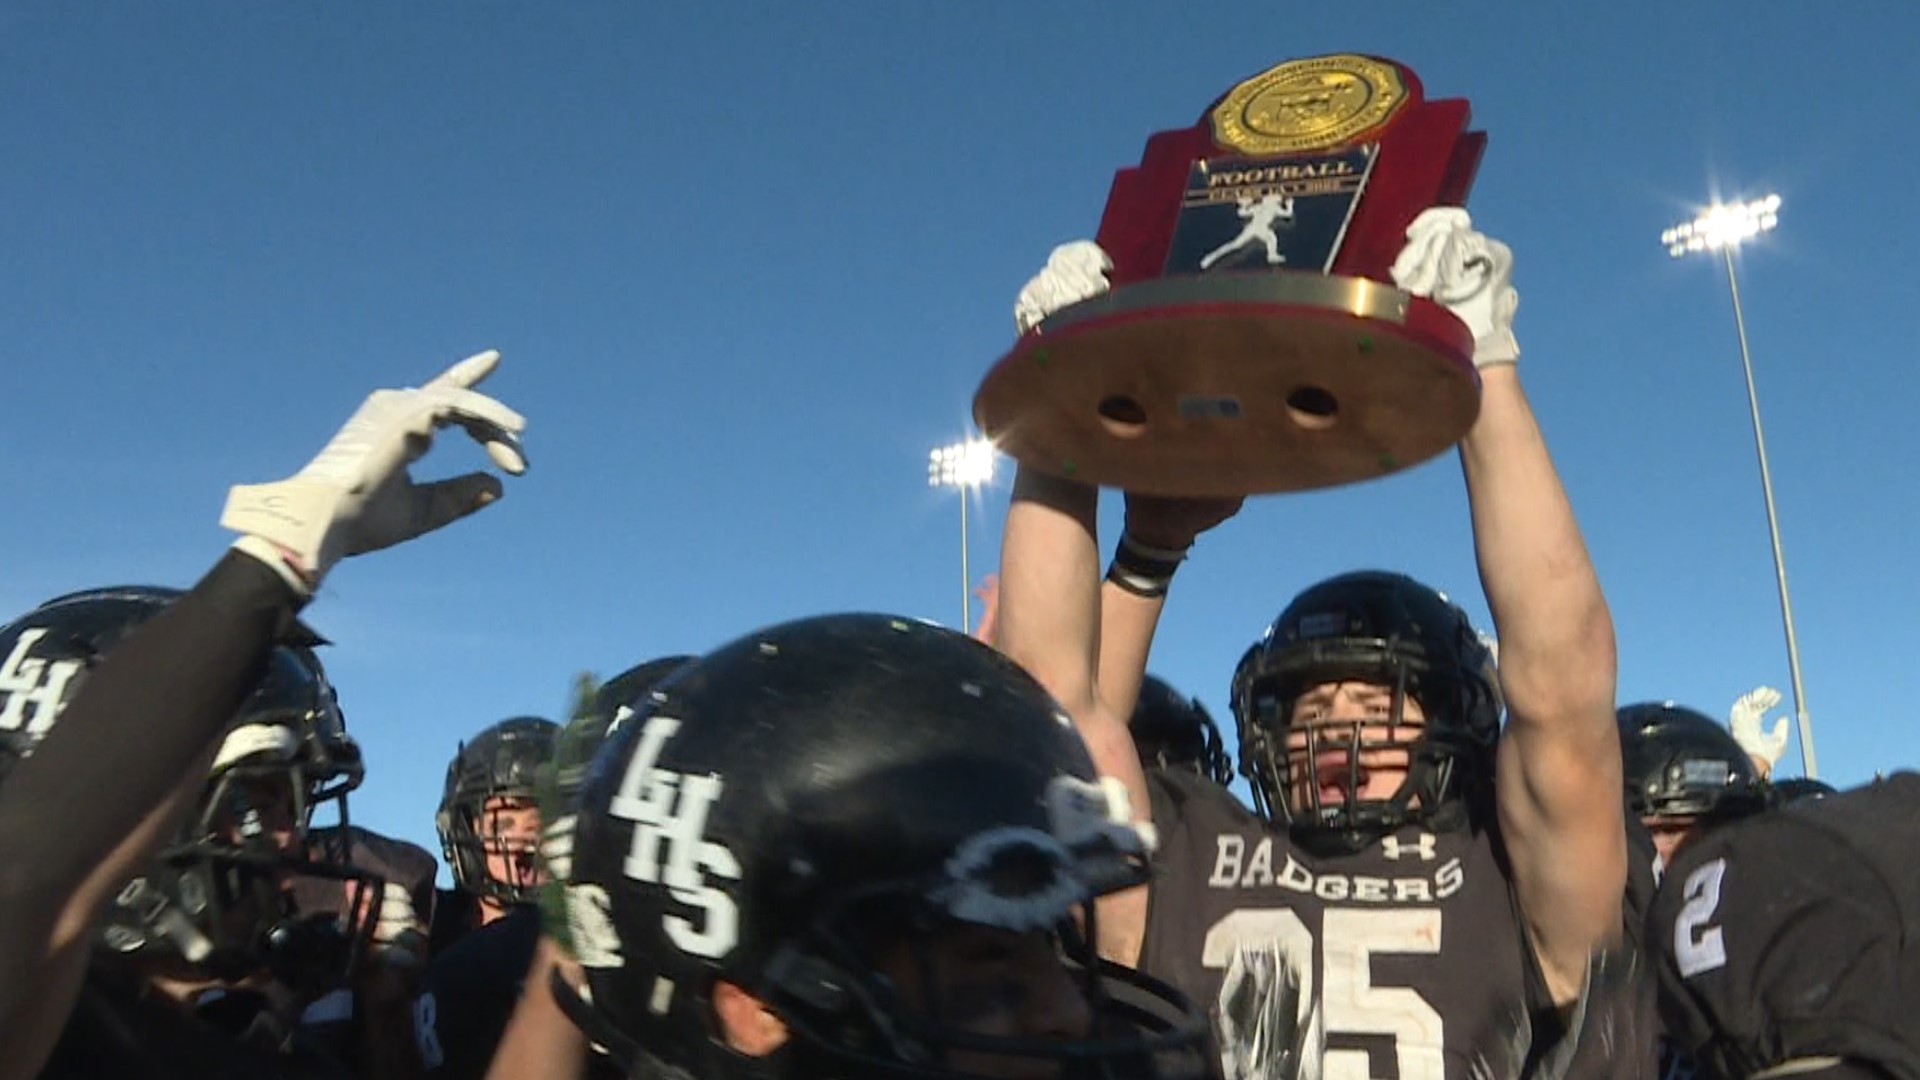 The Badgers topped the Eagles 39-21 in the Class 1A football state title game on Saturday afternoon.